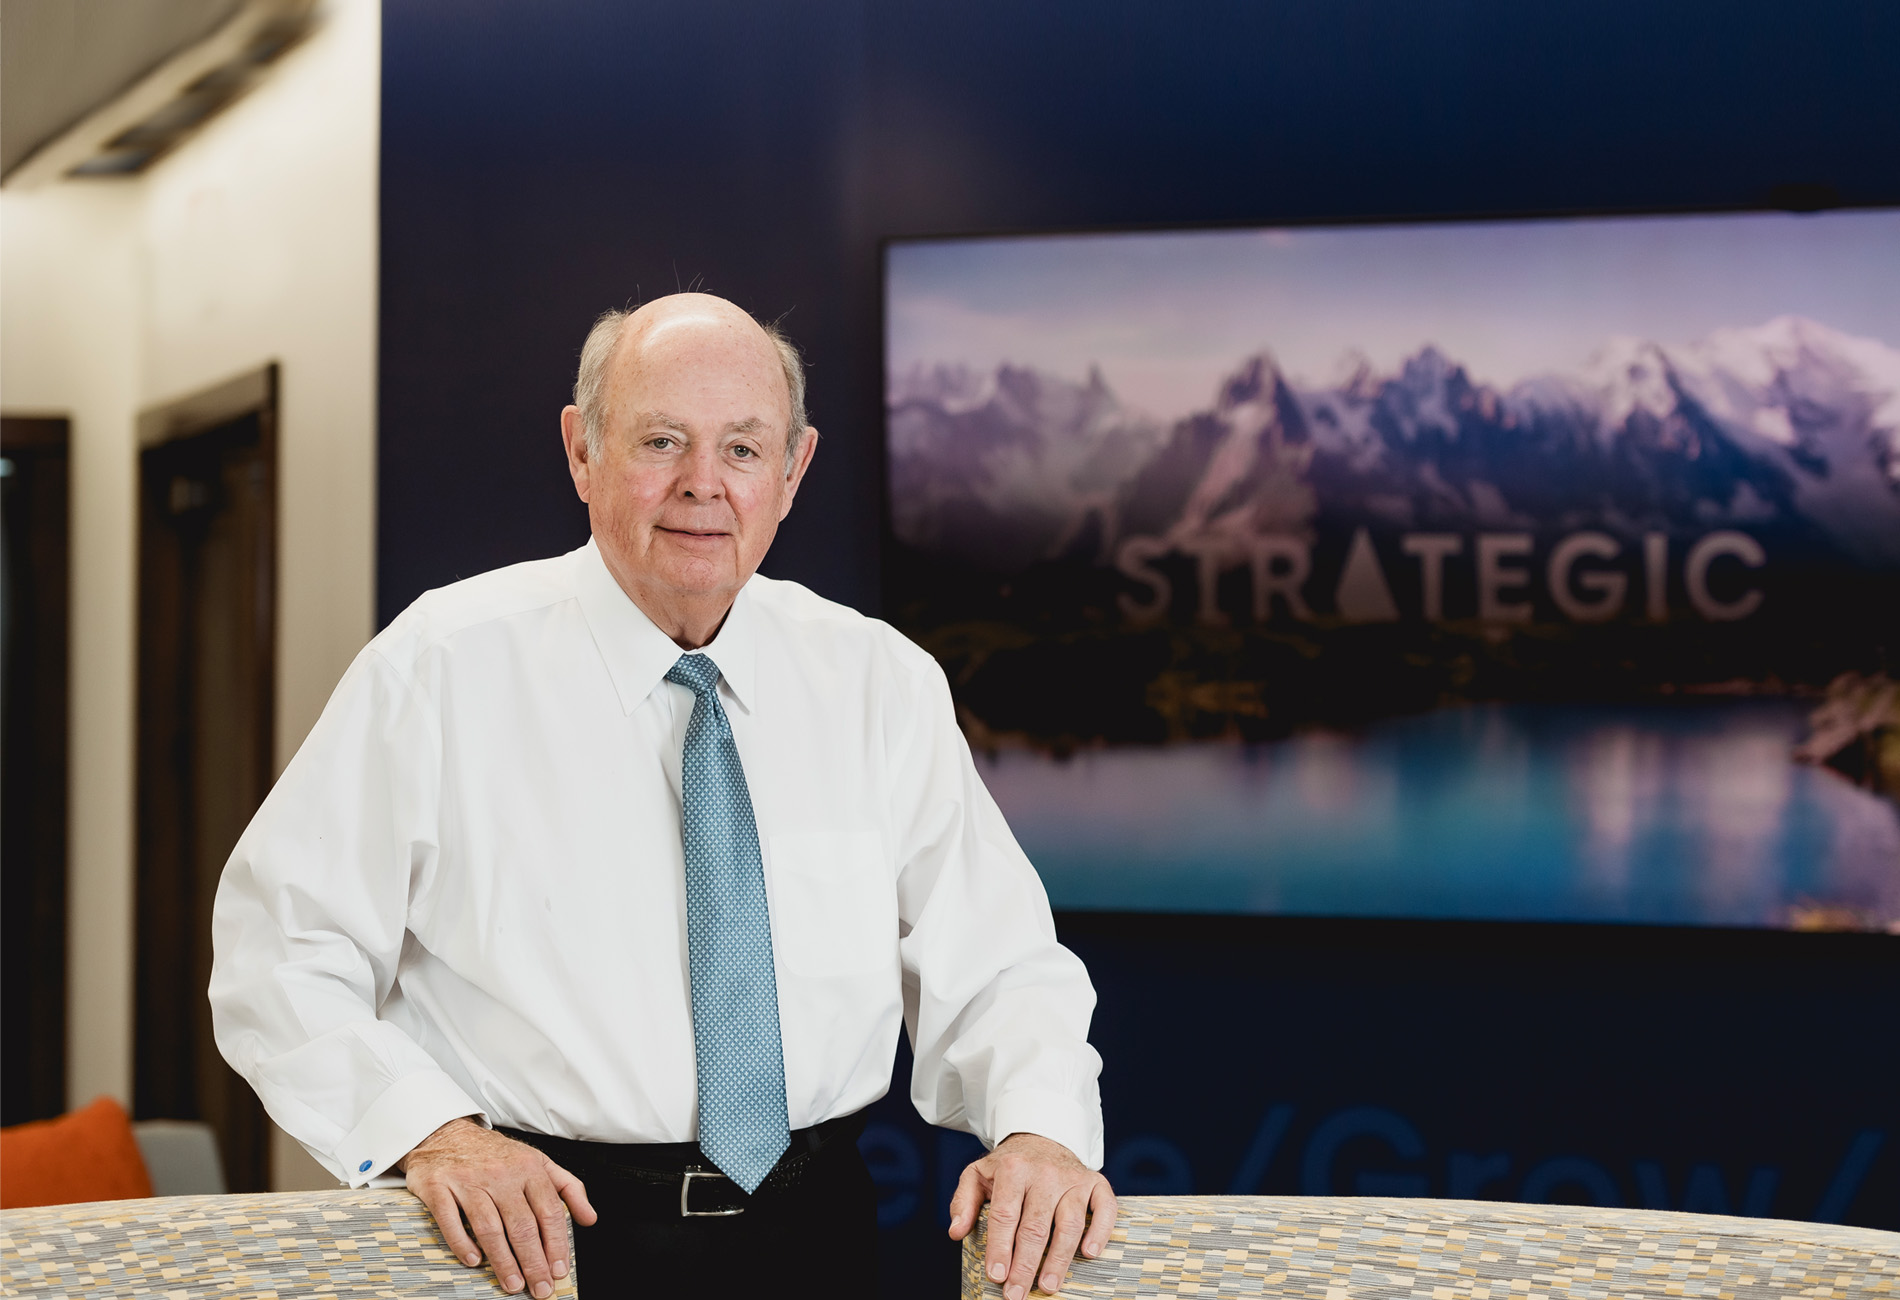 Alan Leist, Jr. CFP, Wealth Management Firm Founder. A man wearing a white button down and tie.